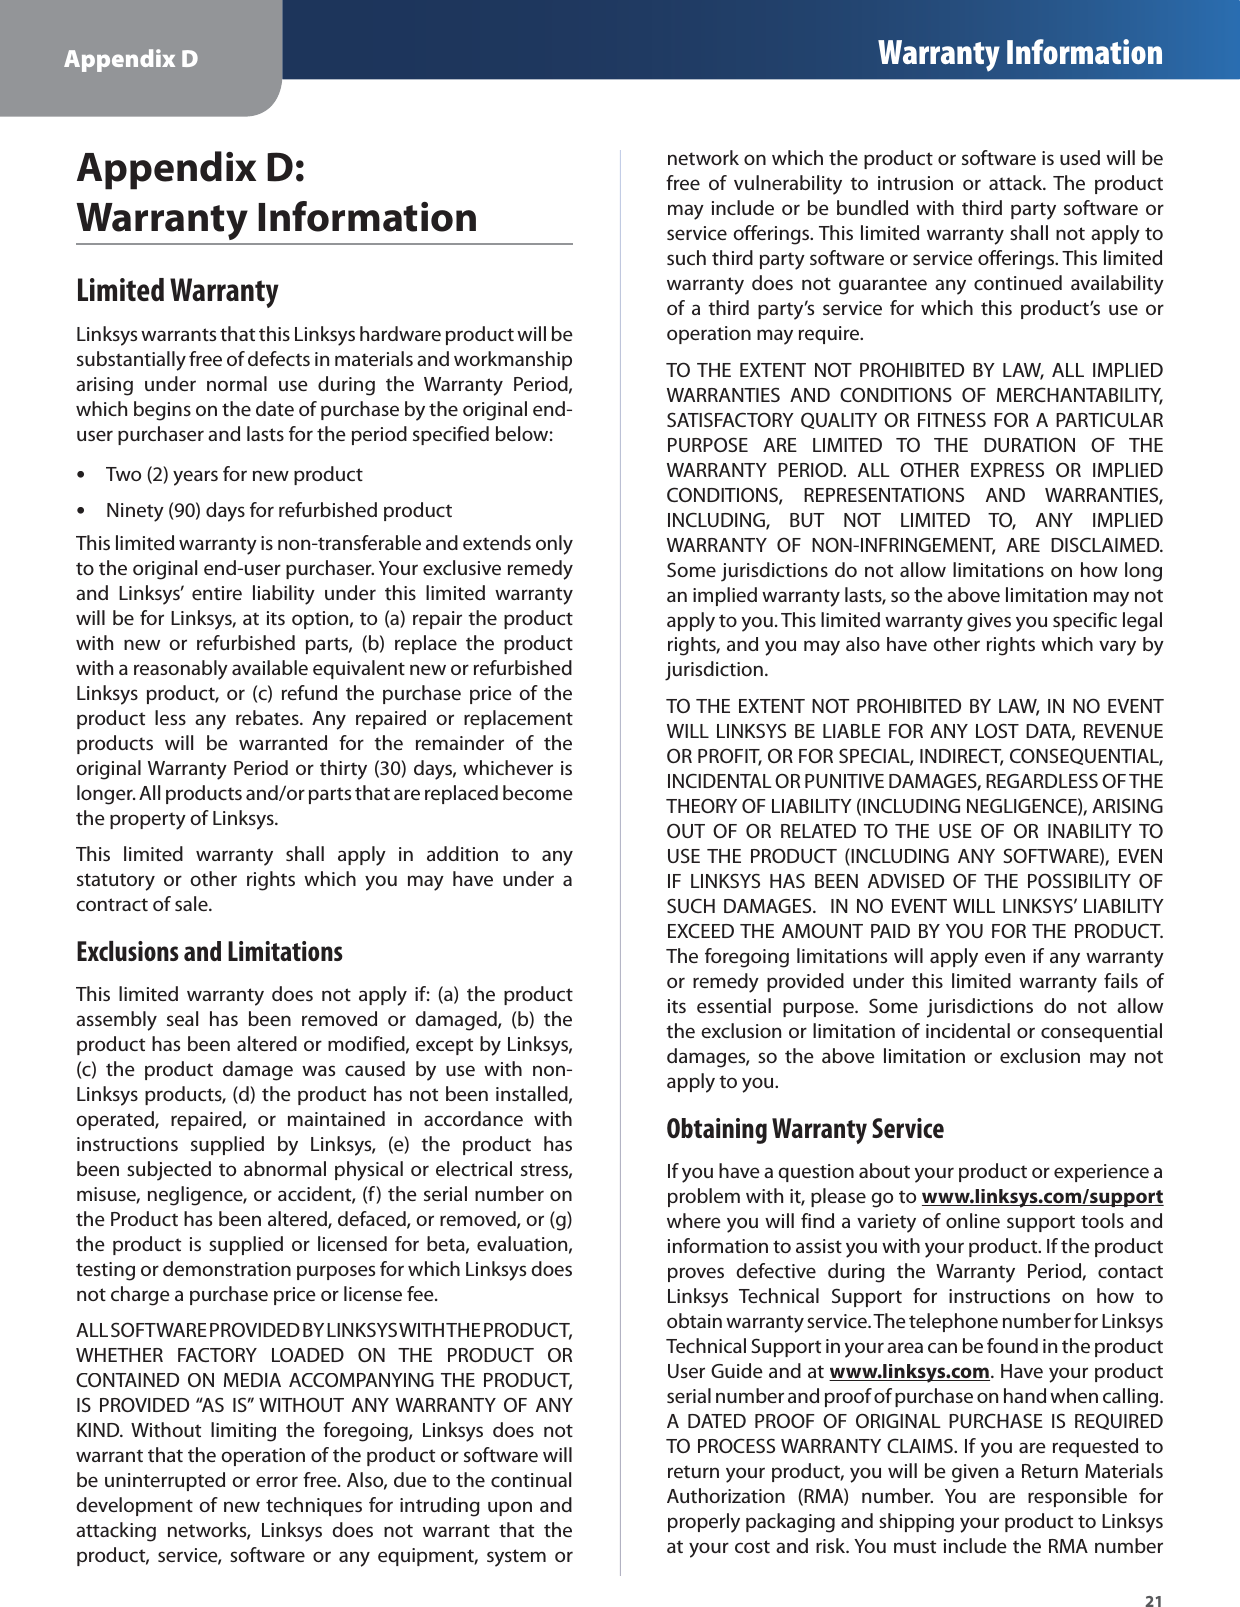 Appendix D Warranty Information21Appendix D: Warranty InformationLimited WarrantyLinksys warrants that this Linksys hardware product will besubstantially free of defects in materials and workmanshiparising under normal use during the Warranty Period,which begins on the date of purchase by the original end-user purchaser and lasts for the period specified below:Two (2) years for new productsNinety (90) days for refurbished productsThis limited warranty is non-transferable and extends onlyto the original end-user purchaser. Your exclusive remedyand Linksys’ entire liability under this limited warrantywill be for Linksys, at its option, to (a) repair the productwith new or refurbished parts, (b) replace the productwith a reasonably available equivalent new or refurbishedLinksys product, or (c) refund the purchase price of theproduct less any rebates. Any repaired or replacementproducts will be warranted for the remainder of theoriginal Warranty Period or thirty (30) days, whichever islonger. All products and/or parts that are replaced becomethe property of Linksys.This limited warranty shall apply in addition to anystatutory or other rights which you may have under acontract of sale.Exclusions and Limitations This limited warranty does not apply if: (a) the productassembly seal has been removed or damaged, (b) theproduct has been altered or modified, except by Linksys,(c) the product damage was caused by use with non-Linksys products, (d) the product has not been installed,operated, repaired, or maintained in accordance withinstructions supplied by Linksys, (e) the product hasbeen subjected to abnormal physical or electrical stress,misuse, negligence, or accident, (f) the serial number onthe Product has been altered, defaced, or removed, or (g)the product is supplied or licensed for beta, evaluation,testing or demonstration purposes for which Linksys doesnot charge a purchase price or license fee.ALL SOFTWARE PROVIDED BY LINKSYS WITH THE PRODUCT,WHETHER FACTORY LOADED ON THE PRODUCT ORCONTAINED ON MEDIA ACCOMPANYING THE PRODUCT,IS PROVIDED “AS IS” WITHOUT ANY WARRANTY OF ANYKIND. Without limiting the foregoing, Linksys does notwarrant that the operation of the product or software willbe uninterrupted or error free. Also, due to the continualdevelopment of new techniques for intruding upon andattacking networks, Linksys does not warrant that theproduct, service, software or any equipment, system ornetwork on which the product or software is used will befree of vulnerability to intrusion or attack. The productmay include or be bundled with third party software orservice offerings. This limited warranty shall not apply tosuch third party software or service offerings. This limitedwarranty does not guarantee any continued availabilityof a third party’s service for which this product’s use oroperation may require.TO THE EXTENT NOT PROHIBITED BY LAW, ALL IMPLIEDWARRANTIES AND CONDITIONS OF MERCHANTABILITY,SATISFACTORY QUALITY OR FITNESS FOR A PARTICULARPURPOSE ARE LIMITED TO THE DURATION OF THEWARRANTY PERIOD. ALL OTHER EXPRESS OR IMPLIEDCONDITIONS, REPRESENTATIONS AND WARRANTIES,INCLUDING, BUT NOT LIMITED TO, ANY IMPLIEDWARRANTY OF NON-INFRINGEMENT, ARE DISCLAIMED.Some jurisdictions do not allow limitations on how longan implied warranty lasts, so the above limitation may notapply to you. This limited warranty gives you specific legalrights, and you may also have other rights which vary byjurisdiction.TO THE EXTENT NOT PROHIBITED BY LAW, IN NO EVENT WILL LINKSYS BE LIABLE FOR ANY LOST DATA, REVENUEOR PROFIT, OR FOR SPECIAL, INDIRECT, CONSEQUENTIAL,INCIDENTAL OR PUNITIVE DAMAGES, REGARDLESS OF THETHEORY OF LIABILITY (INCLUDING NEGLIGENCE), ARISINGOUT OF OR RELATED TO THE USE OF OR INABILITY TOUSE THE PRODUCT (INCLUDING ANY SOFTWARE), EVENIF LINKSYS HAS BEEN ADVISED OF THE POSSIBILITY OFSUCH DAMAGES.  IN NO EVENT WILL LINKSYS’ LIABILITYEXCEED THE AMOUNT PAID BY YOU FOR THE PRODUCT.The foregoing limitations will apply even if any warrantyor remedy provided under this limited warranty fails of its essential purpose. Some jurisdictions do not allowthe exclusion or limitation of incidental or consequentialdamages, so the above limitation or exclusion may notapply to you.Obtaining Warranty ServiceIf you have a question about your product or experience aproblem with it, please go towww.linksys.com/supporypptwhere you will find a variety of online support tools andinformation to assist you with your product. If the productproves defective during the Warranty Period, contactLinksys Technical Support for instructions on how toobtain warranty service. The telephone number for LinksysTechnical Support in your area can be found in the productUser Guide and atwww.linksys.comy. Have your productserial number and proof of purchase on hand when calling.A DATED PROOF OF ORIGINAL PURCHASE IS REQUIREDTO PROCESS WARRANTY CLAIMS. If you are requested toreturn your product, you will be given a Return MaterialsAuthorization (RMA) number. You are responsible forproperly packaging and shipping your product to Linksysat your cost and risk. You must include the RMA number